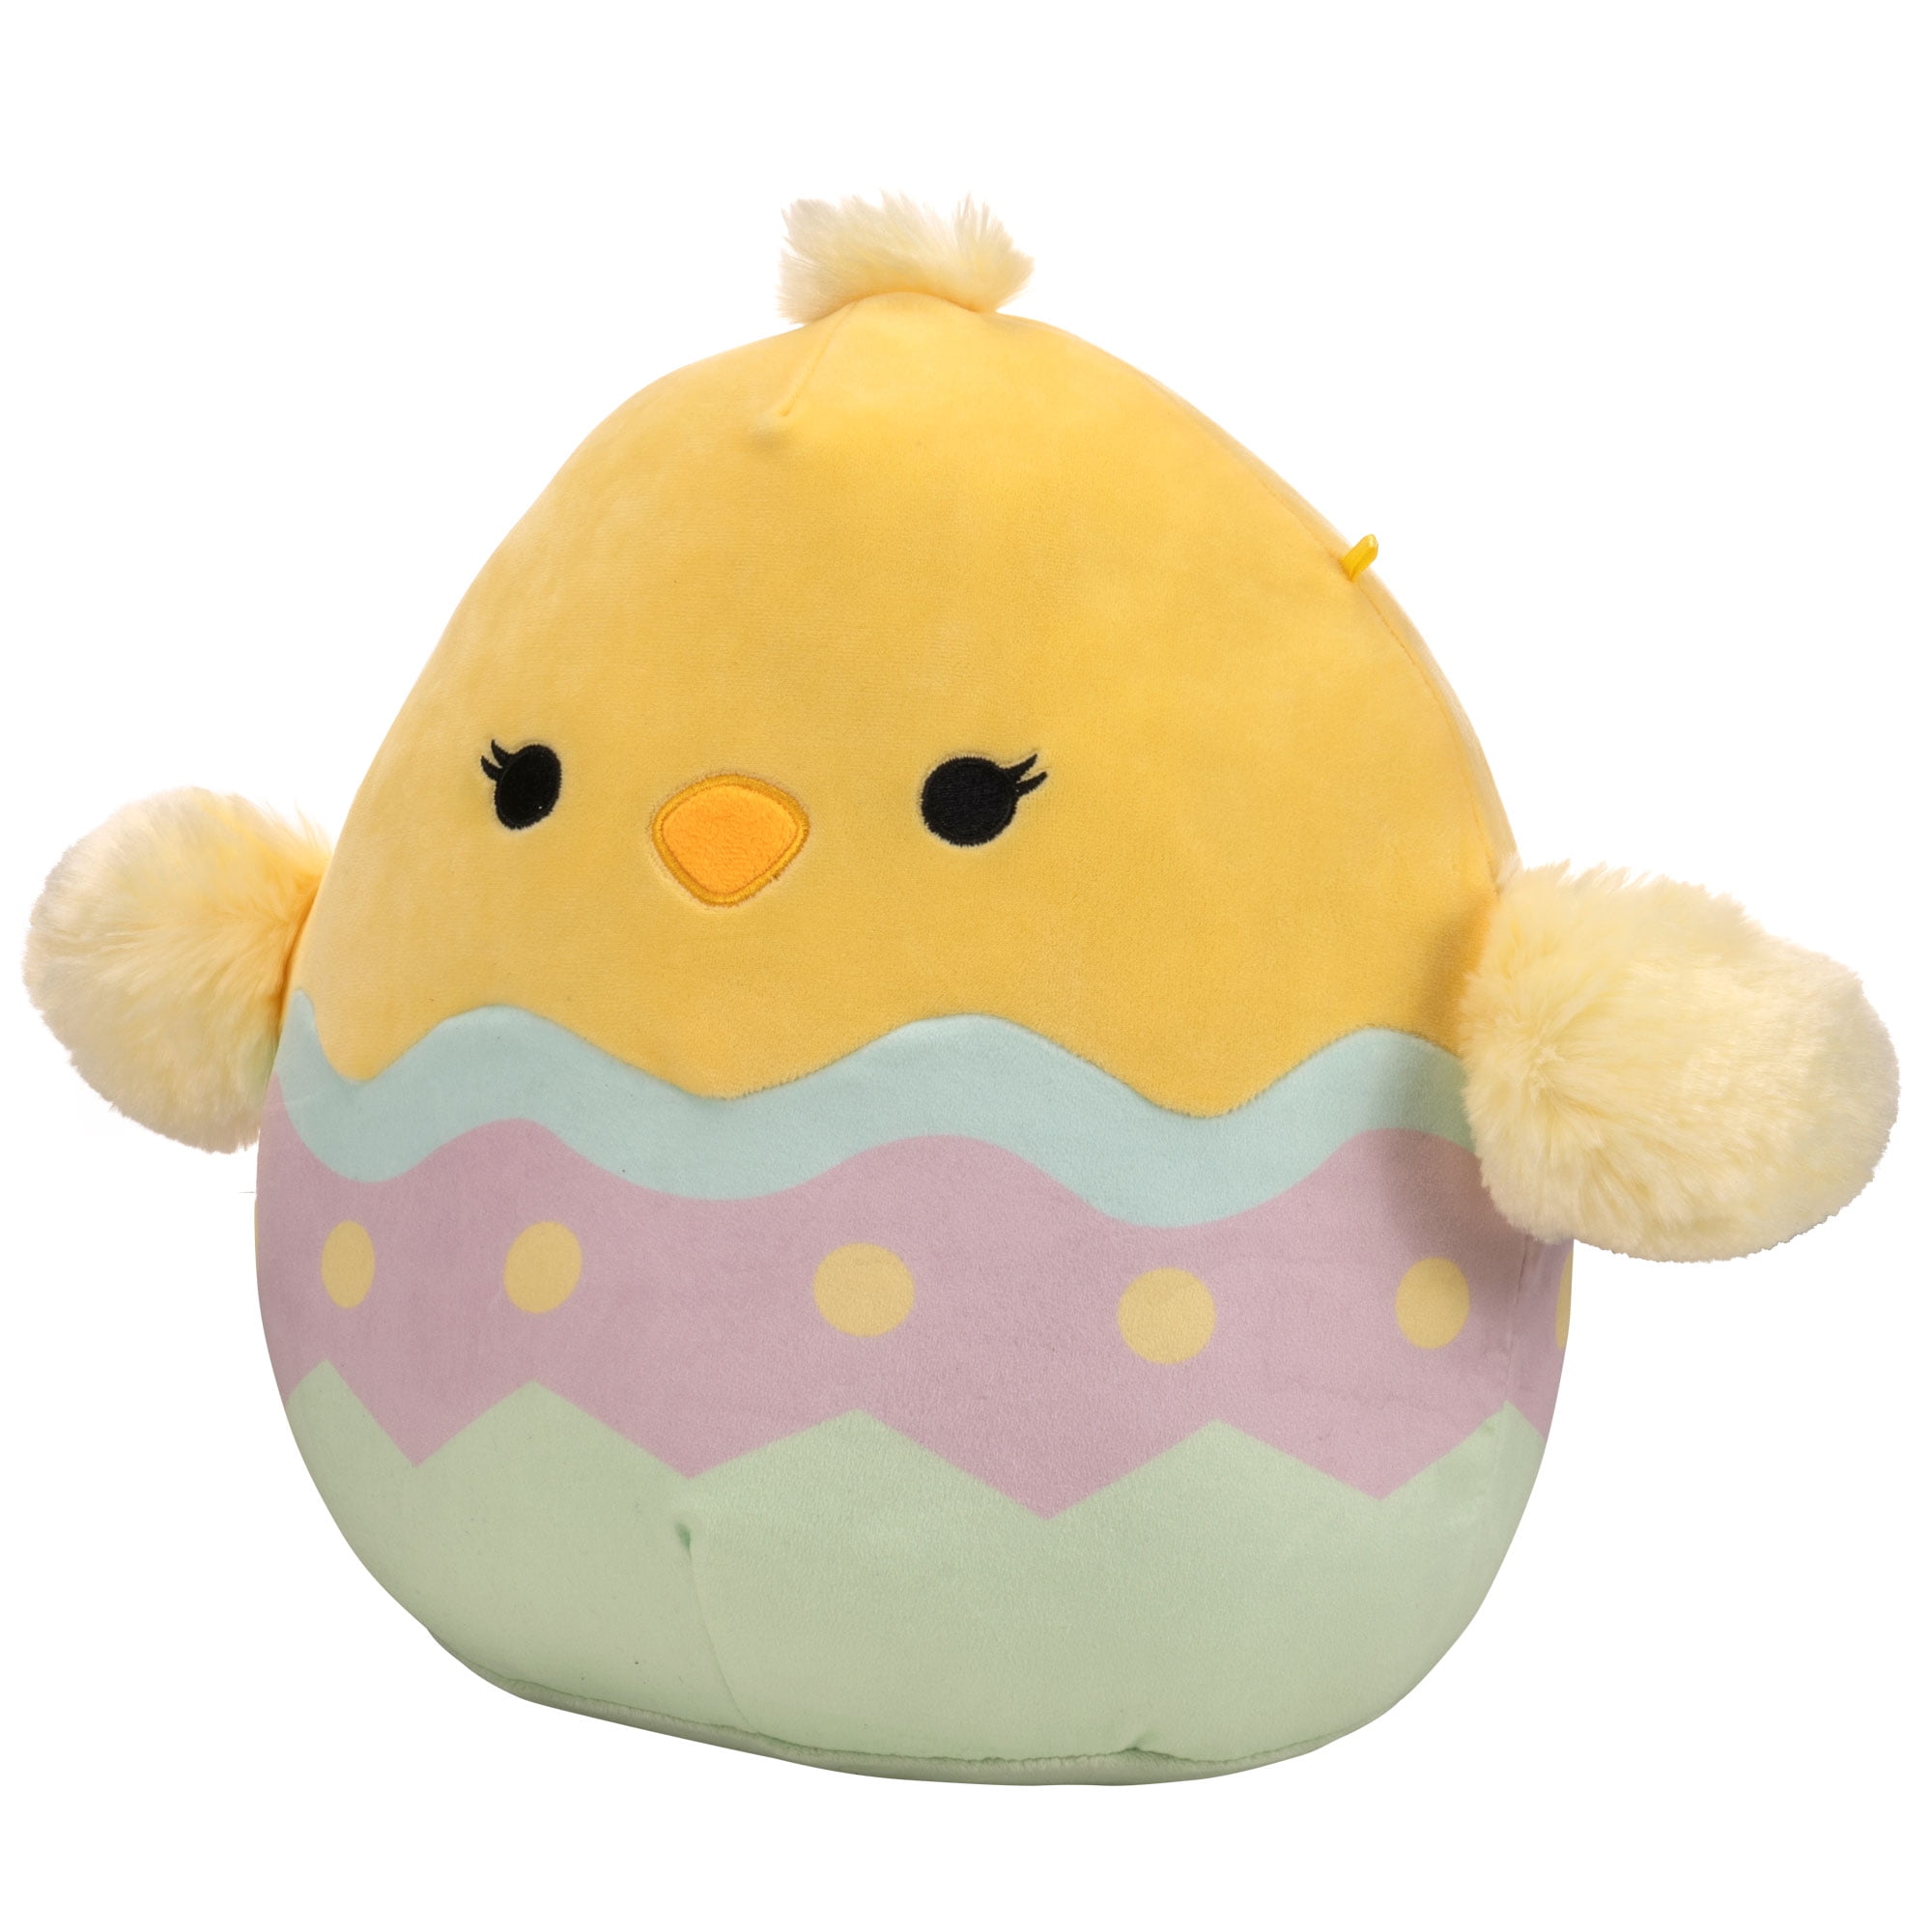 Kellytoy Squishmallow 11” Ivana Yellow Chick Easter 2020 HTF LT Ed Plush Toy for sale online 